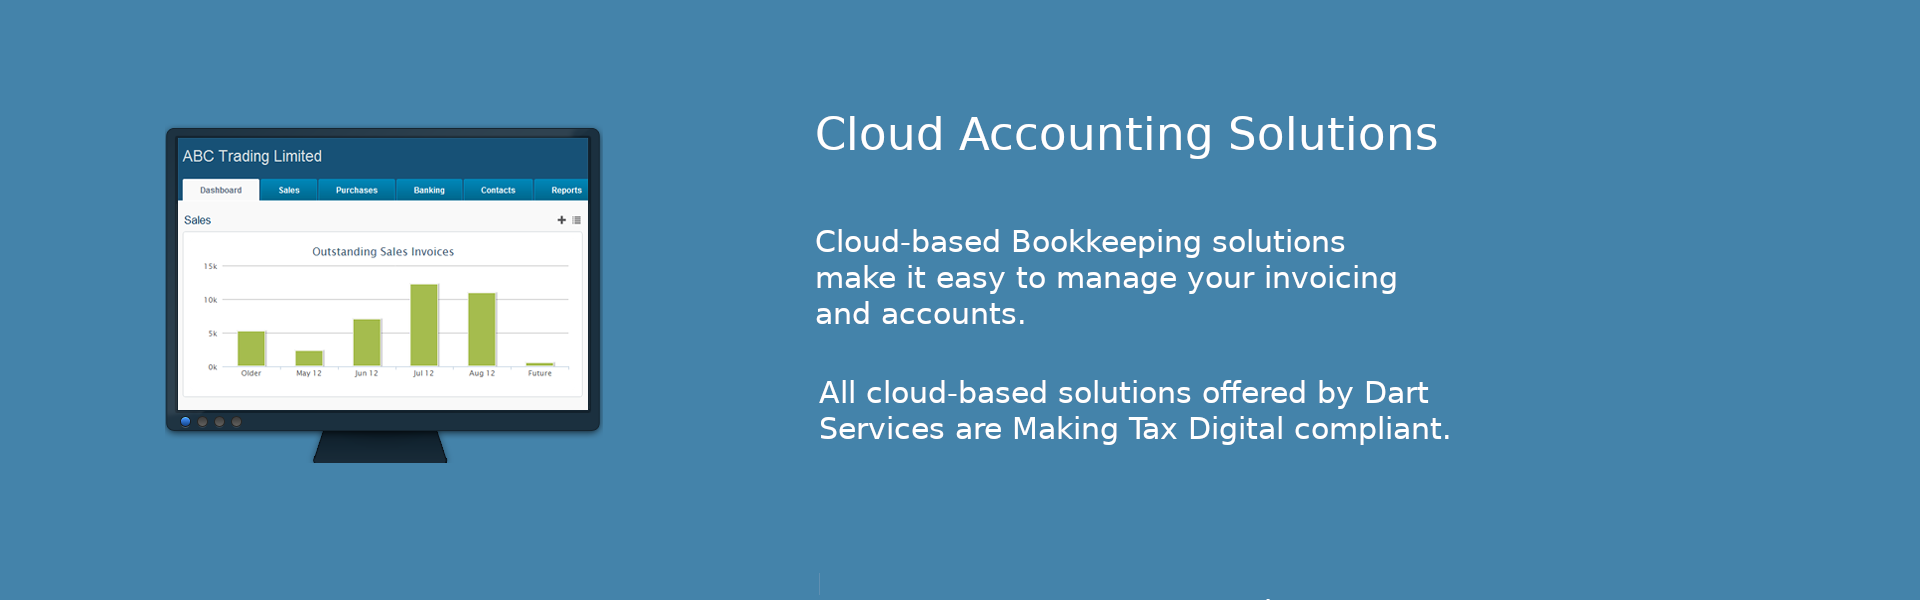 Cloud-based Accounting and Bookkeeping Solutions